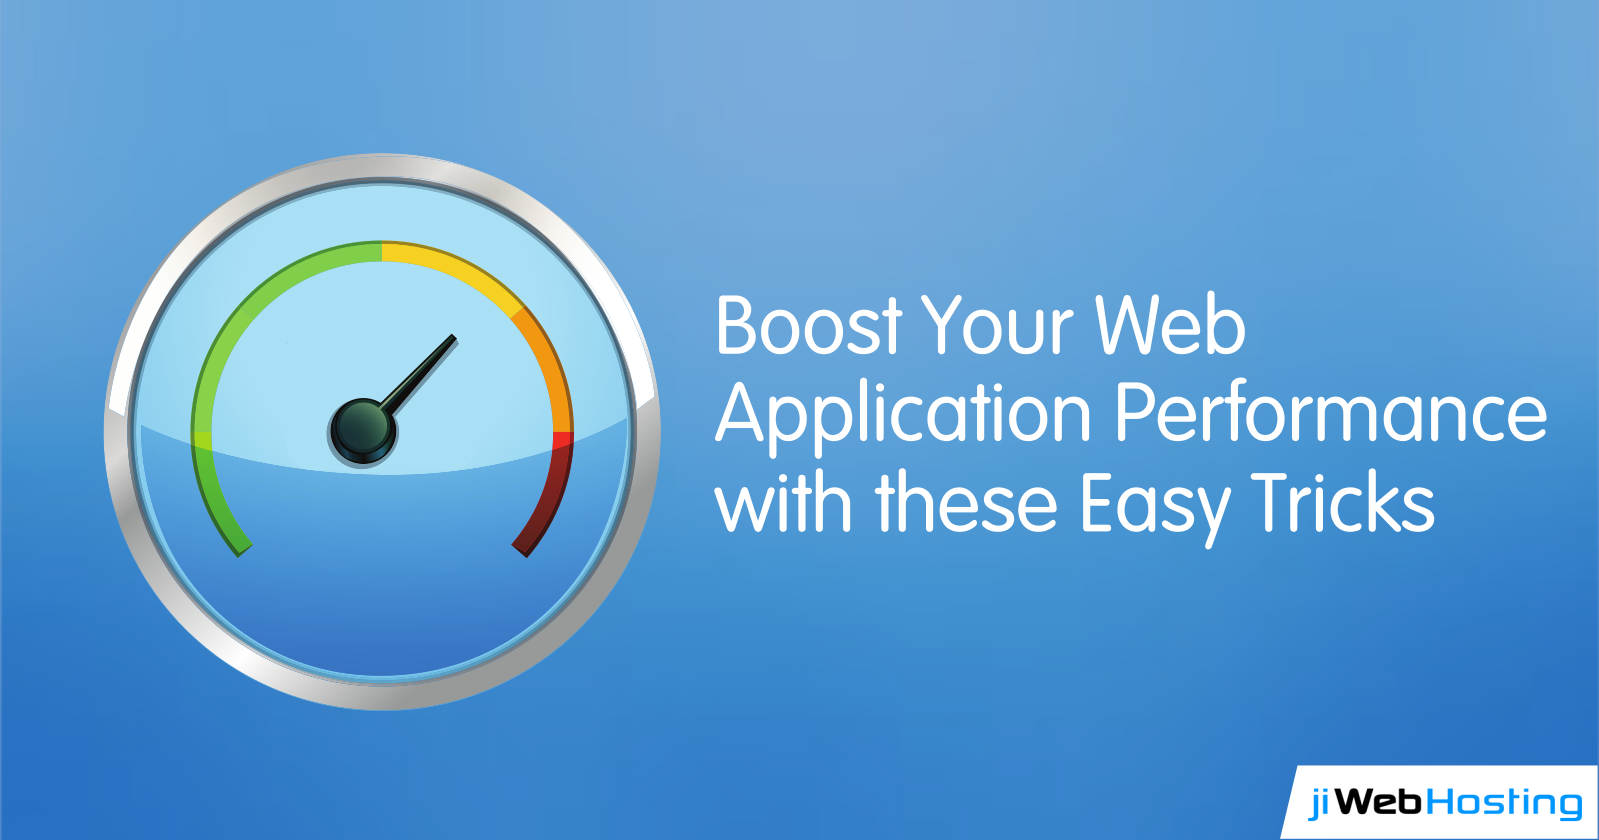 Boost Your Web Application Performance with these Easy Tricks